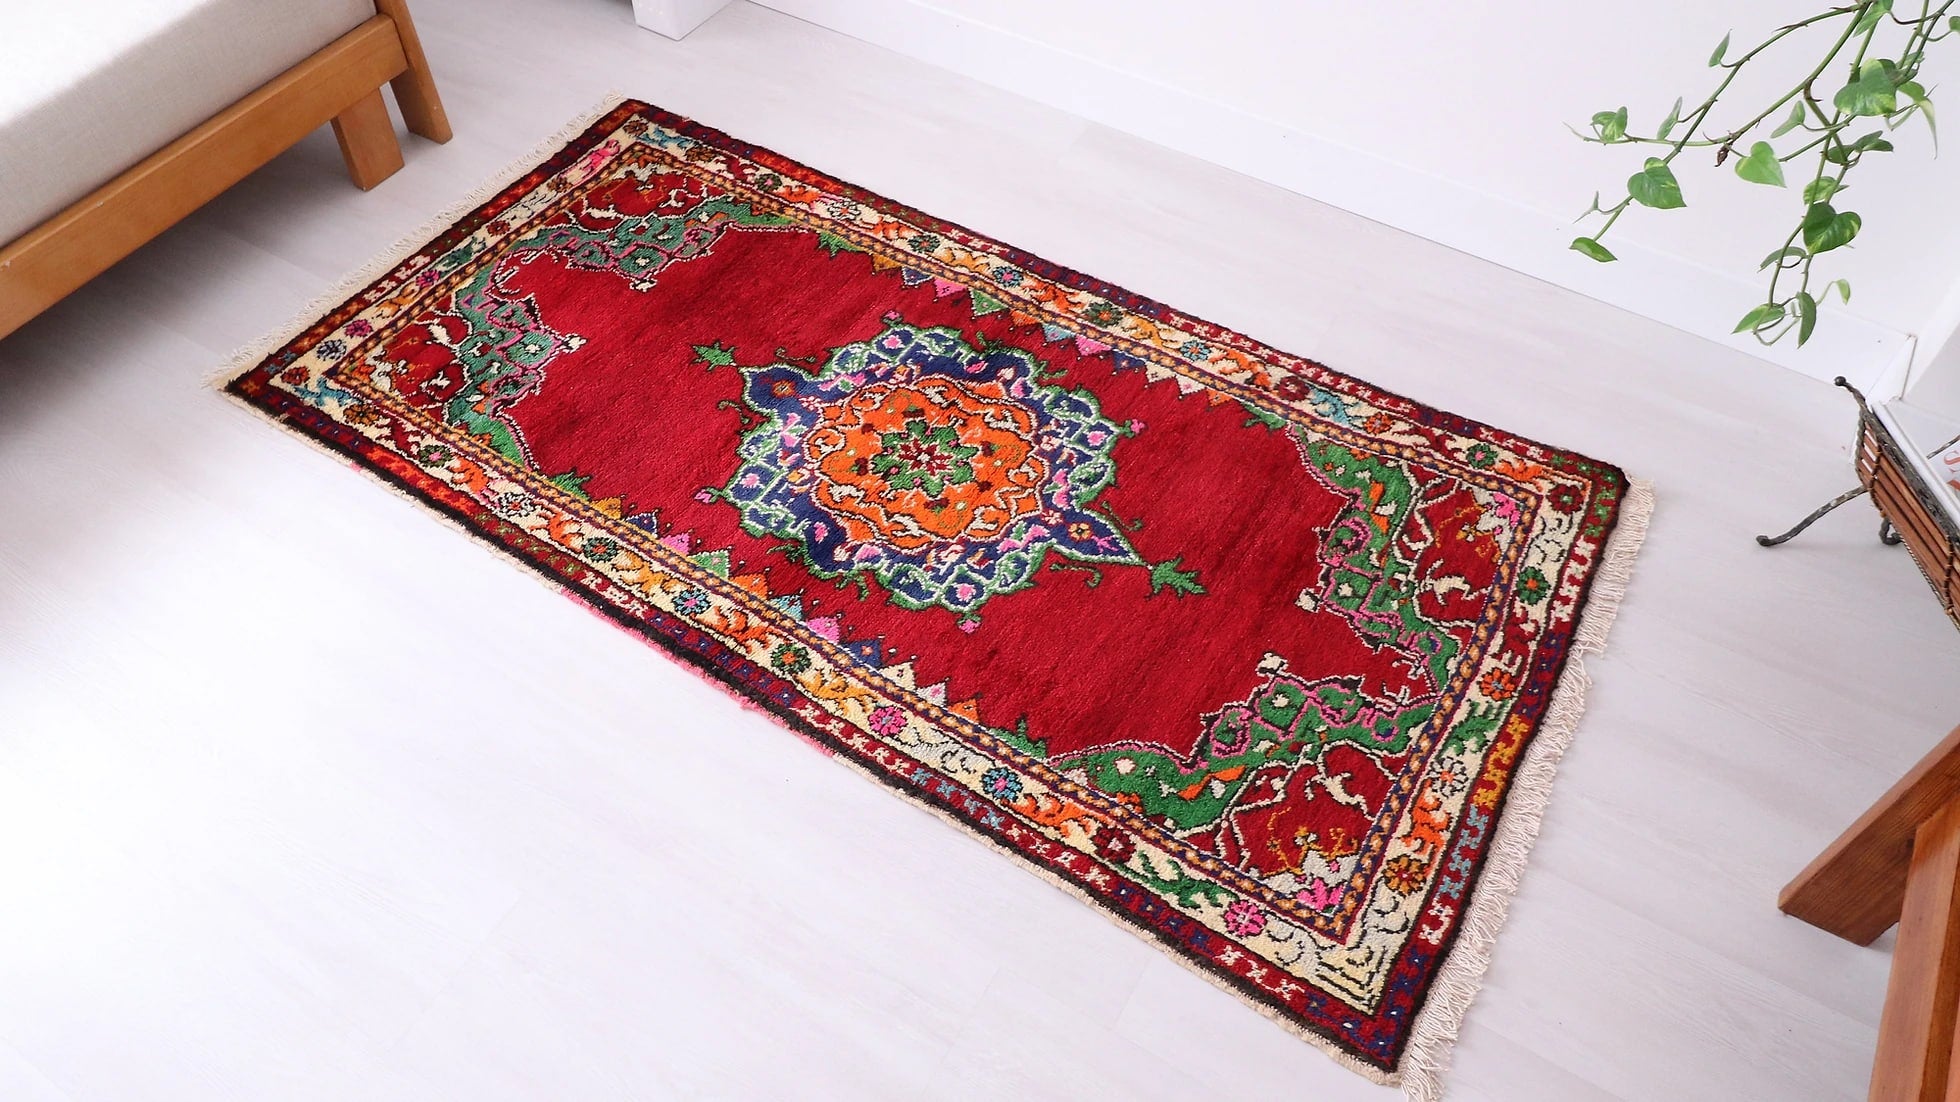 vintage hand-knotted medallion oriental rug in red from the 1960s era